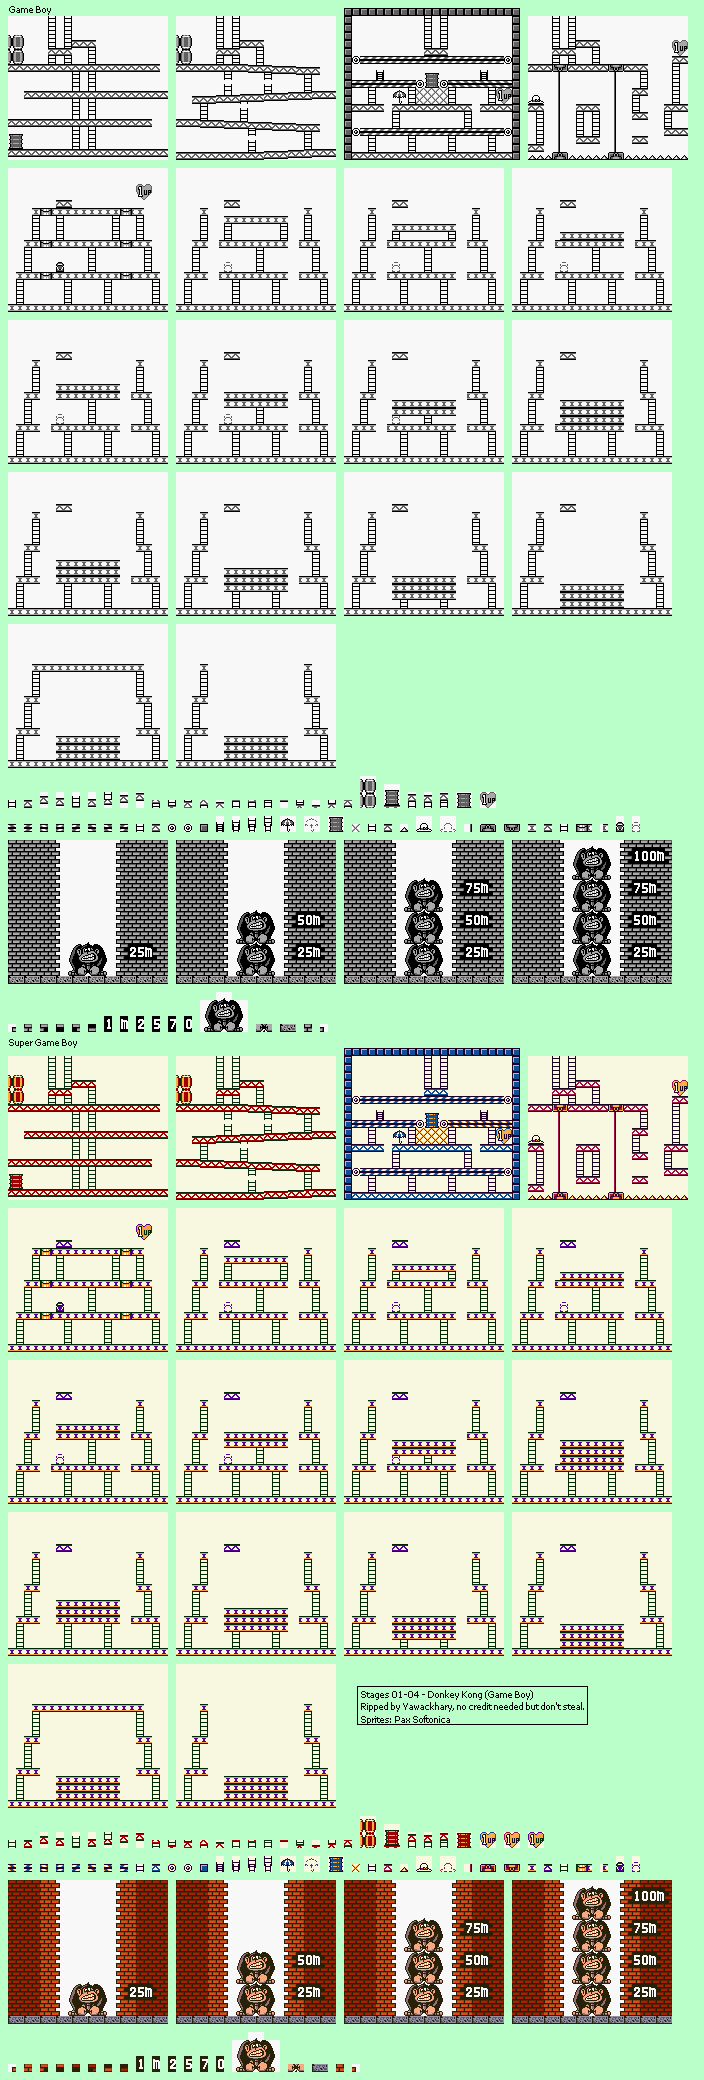 Donkey Kong - Stages 01-04